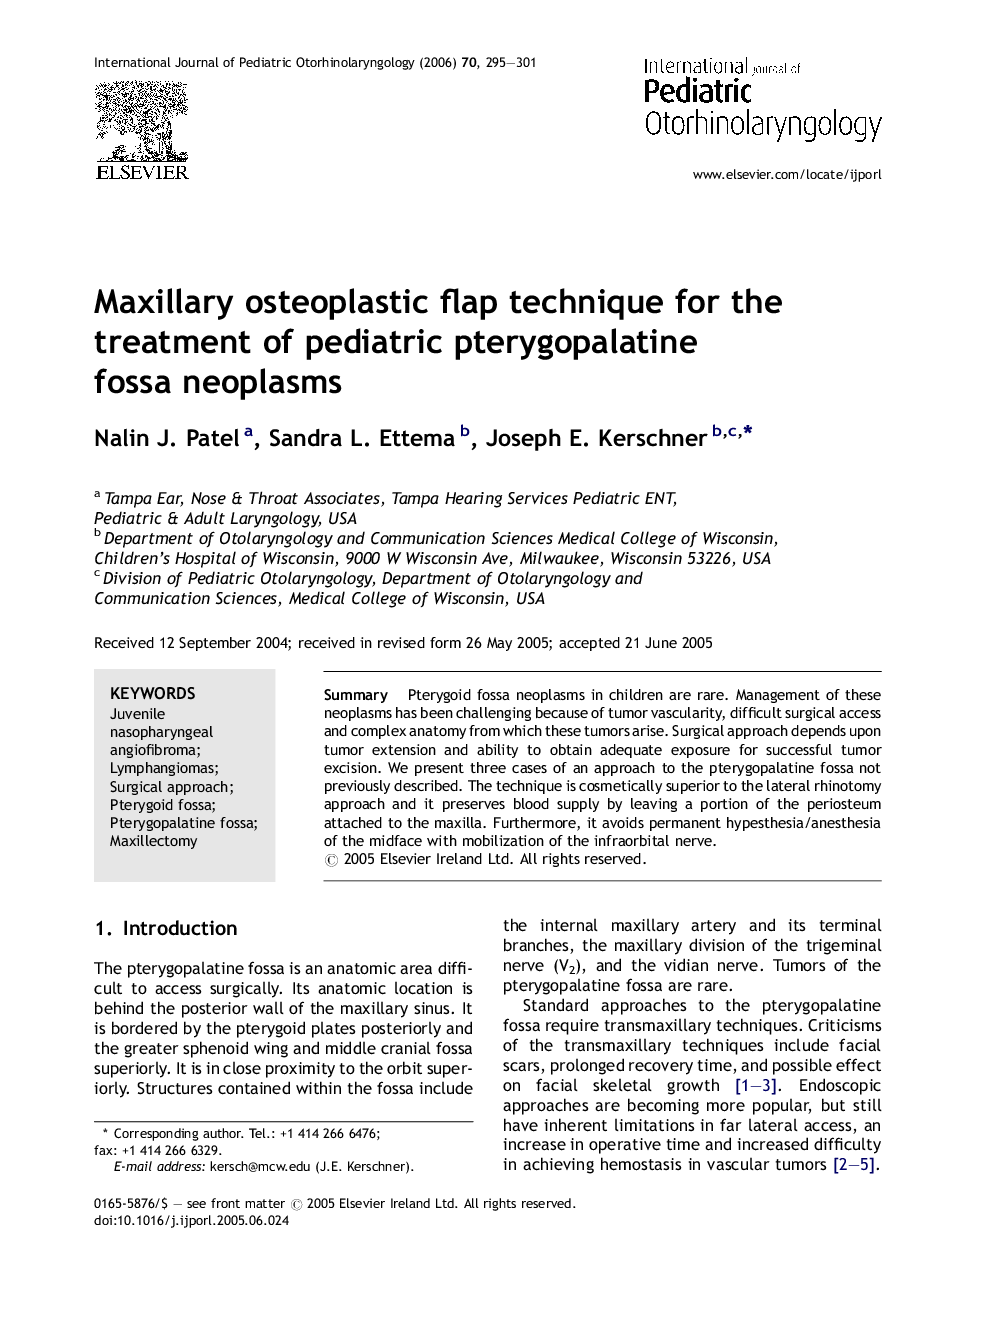 Maxillary osteoplastic flap technique for the treatment of pediatric pterygopalatine fossa neoplasms